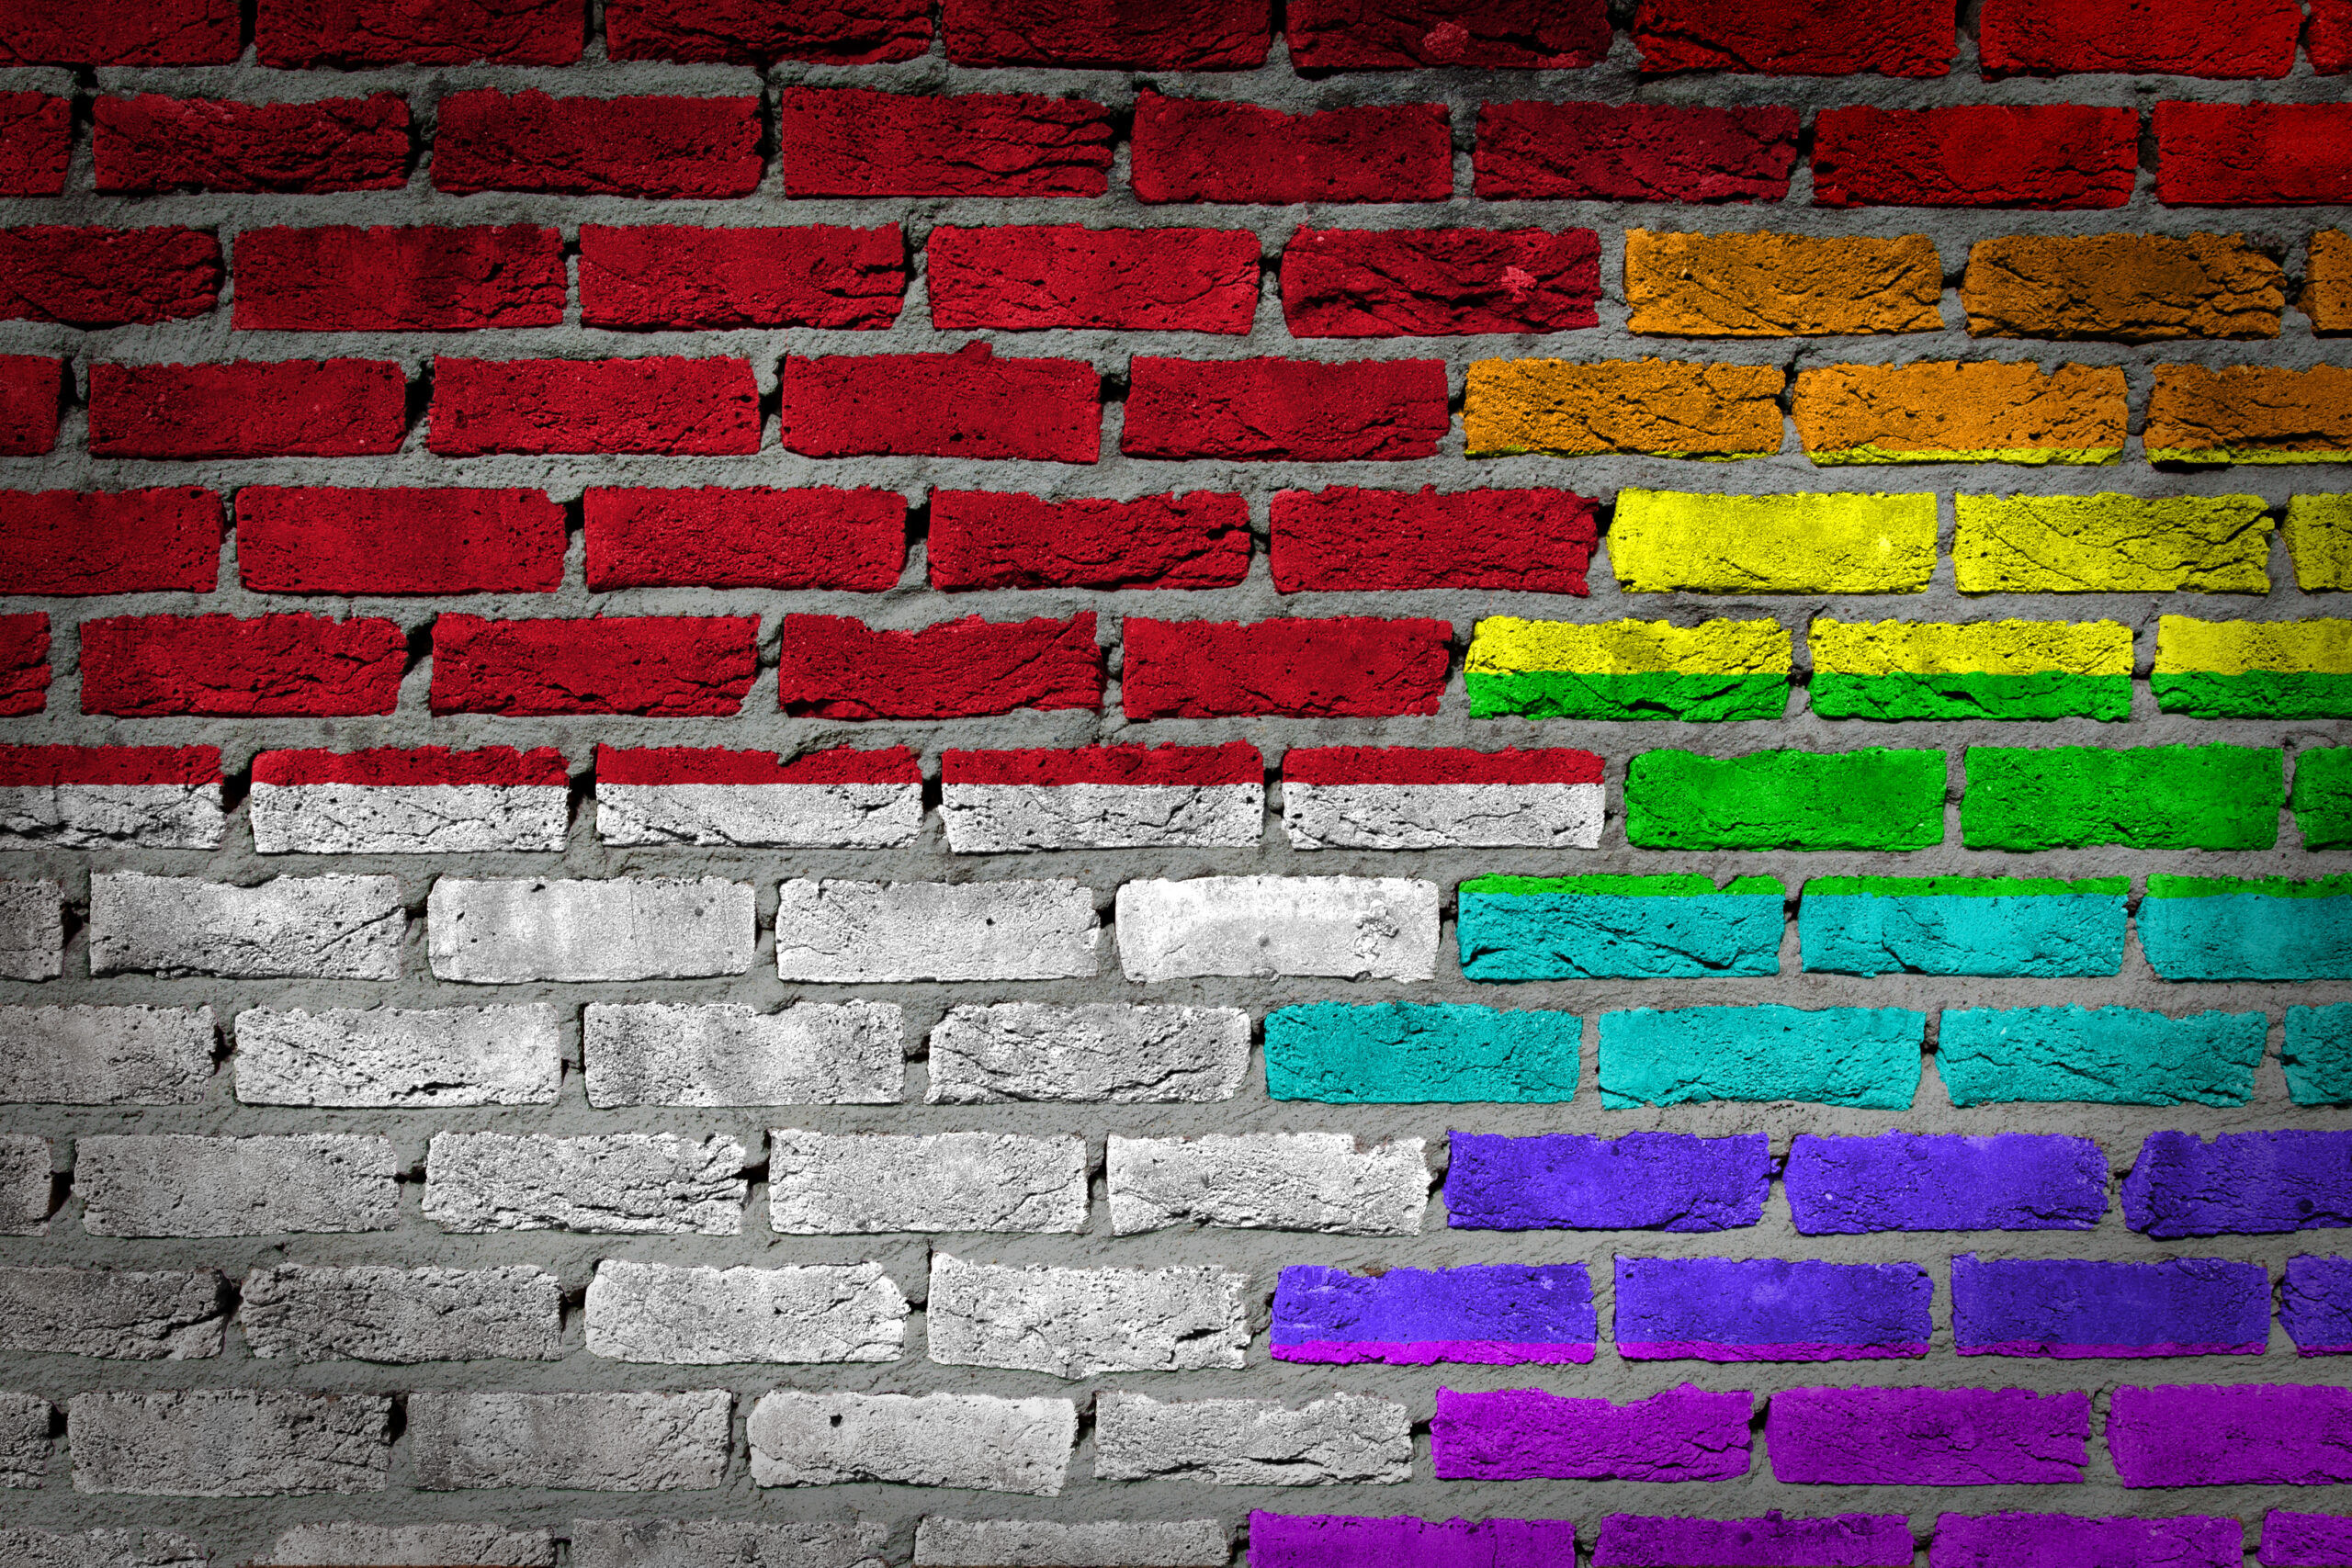 Dark brick wall texture - coutry flag and rainbow flag painted on wall - Indonesia